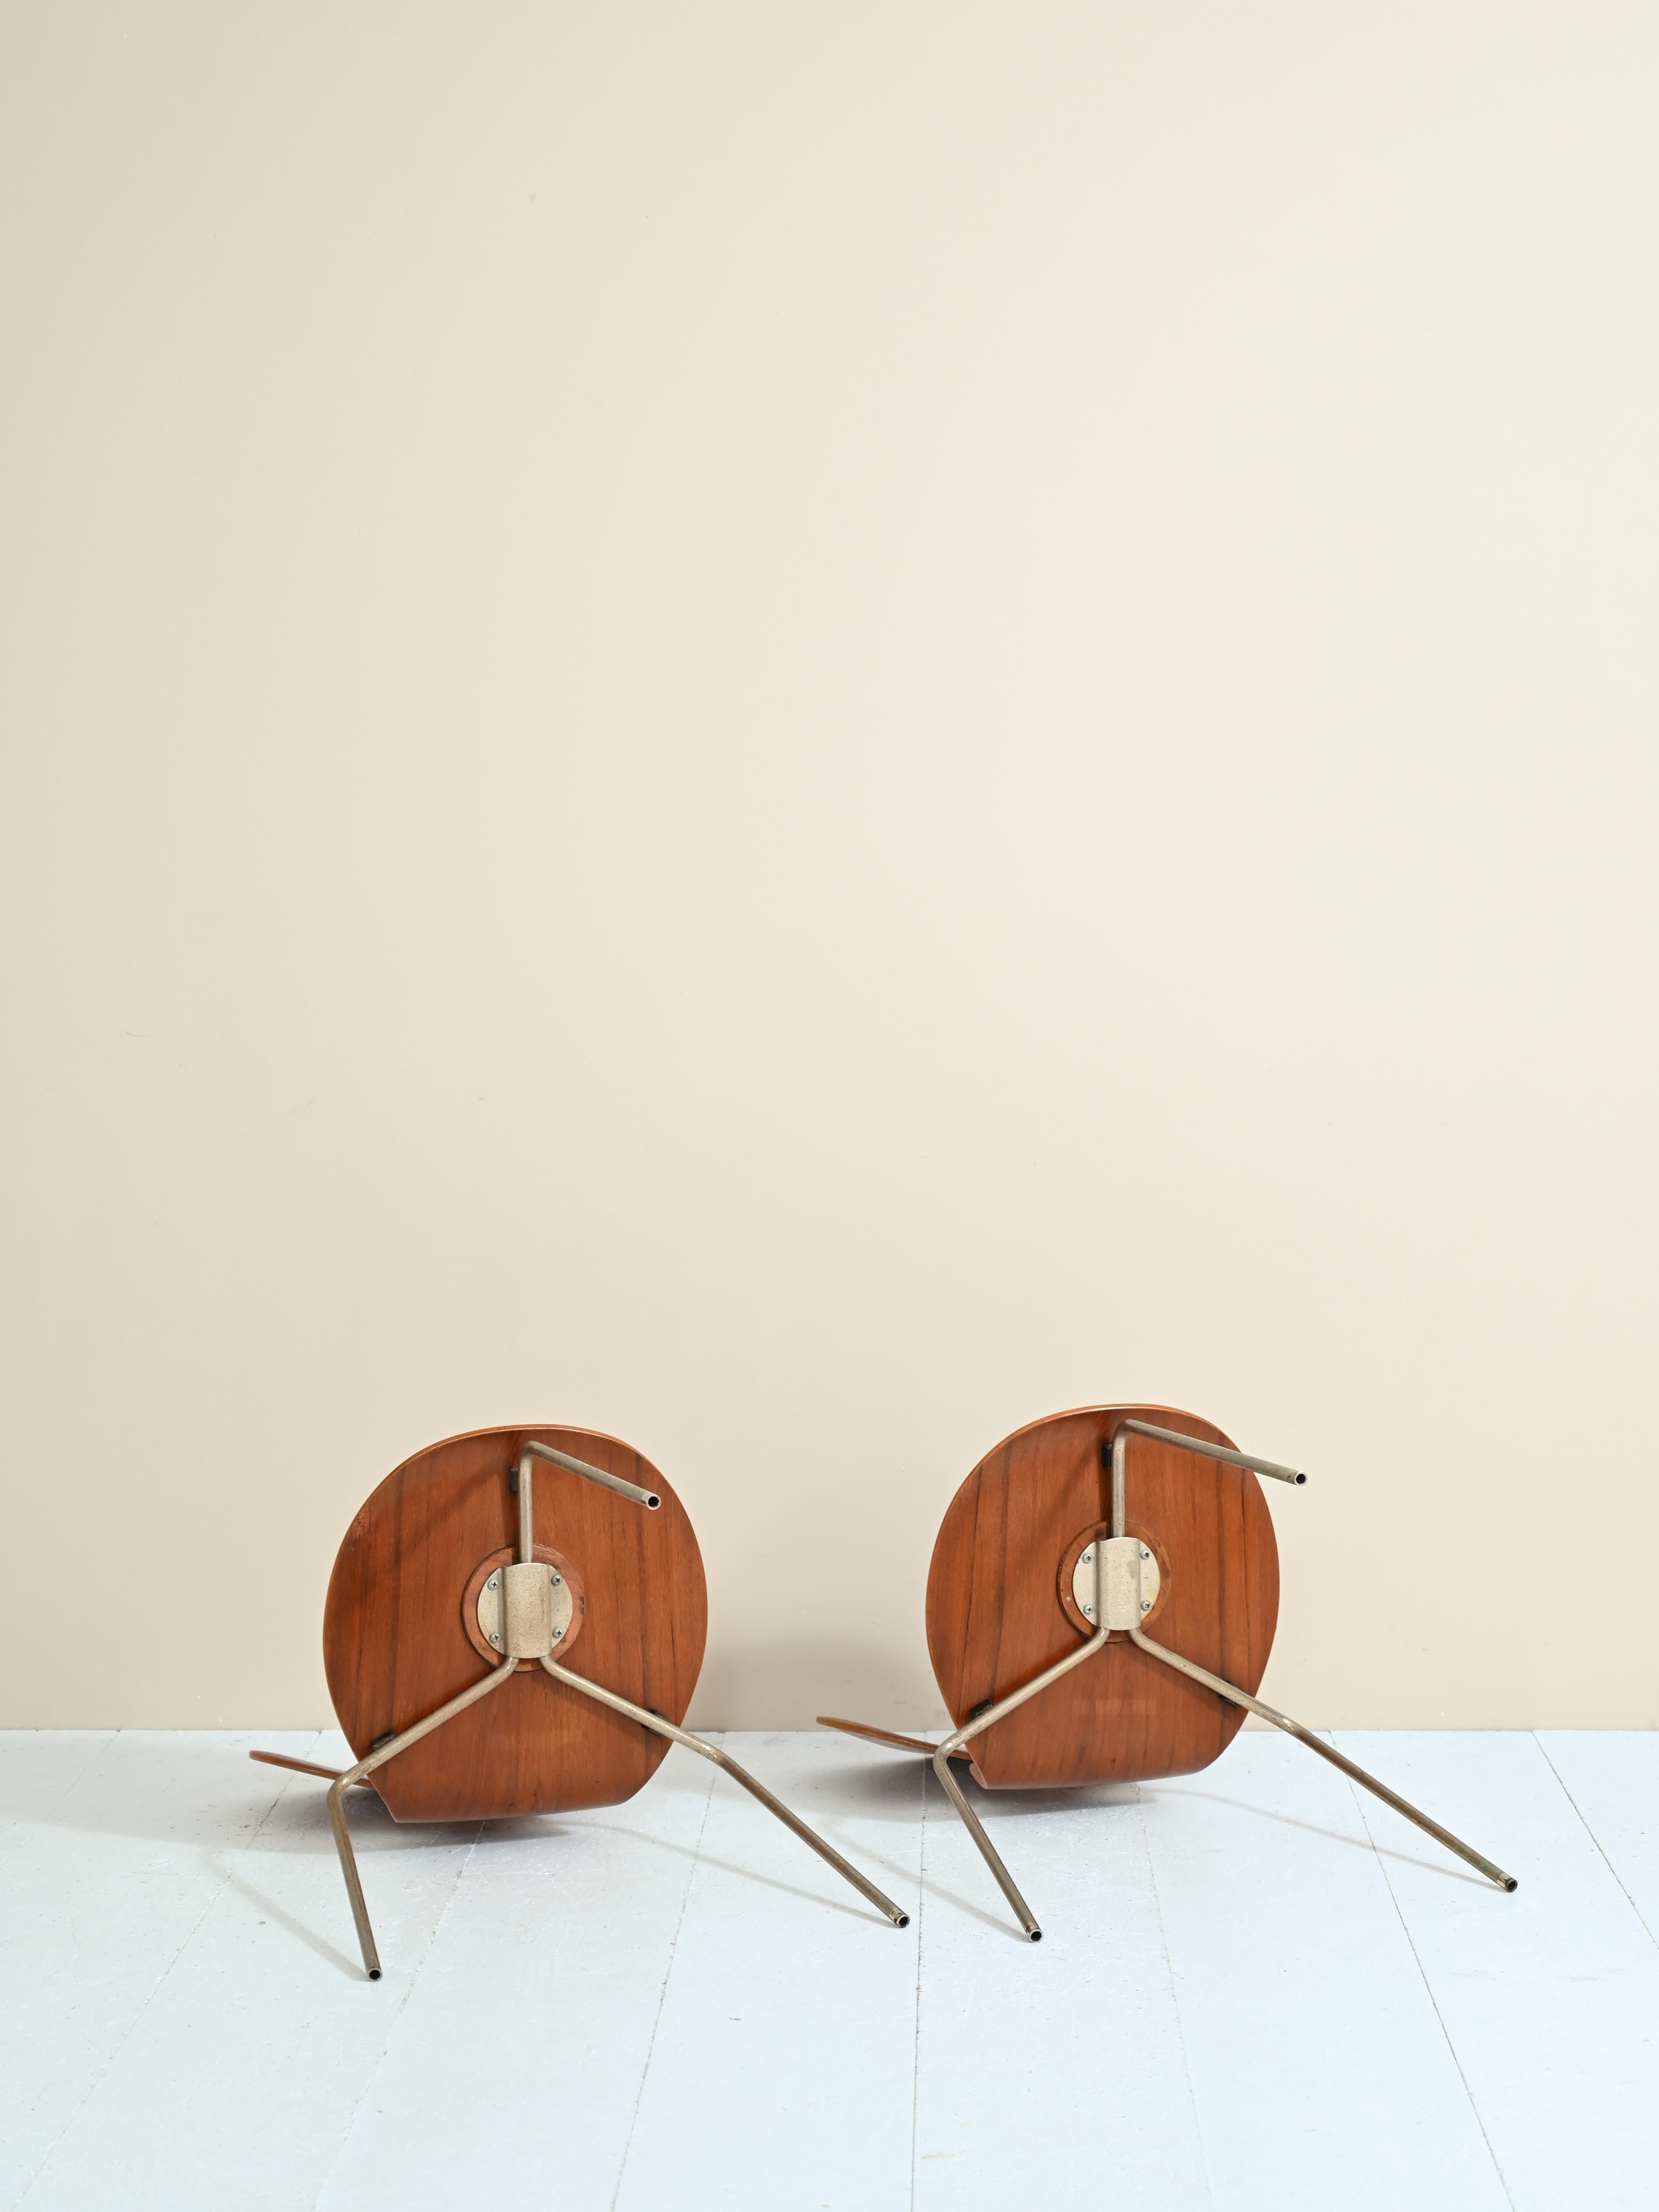 Metal 'Ant Chair' Chairs Model 3101 by Arne Jacobsen for Fritz Hansen